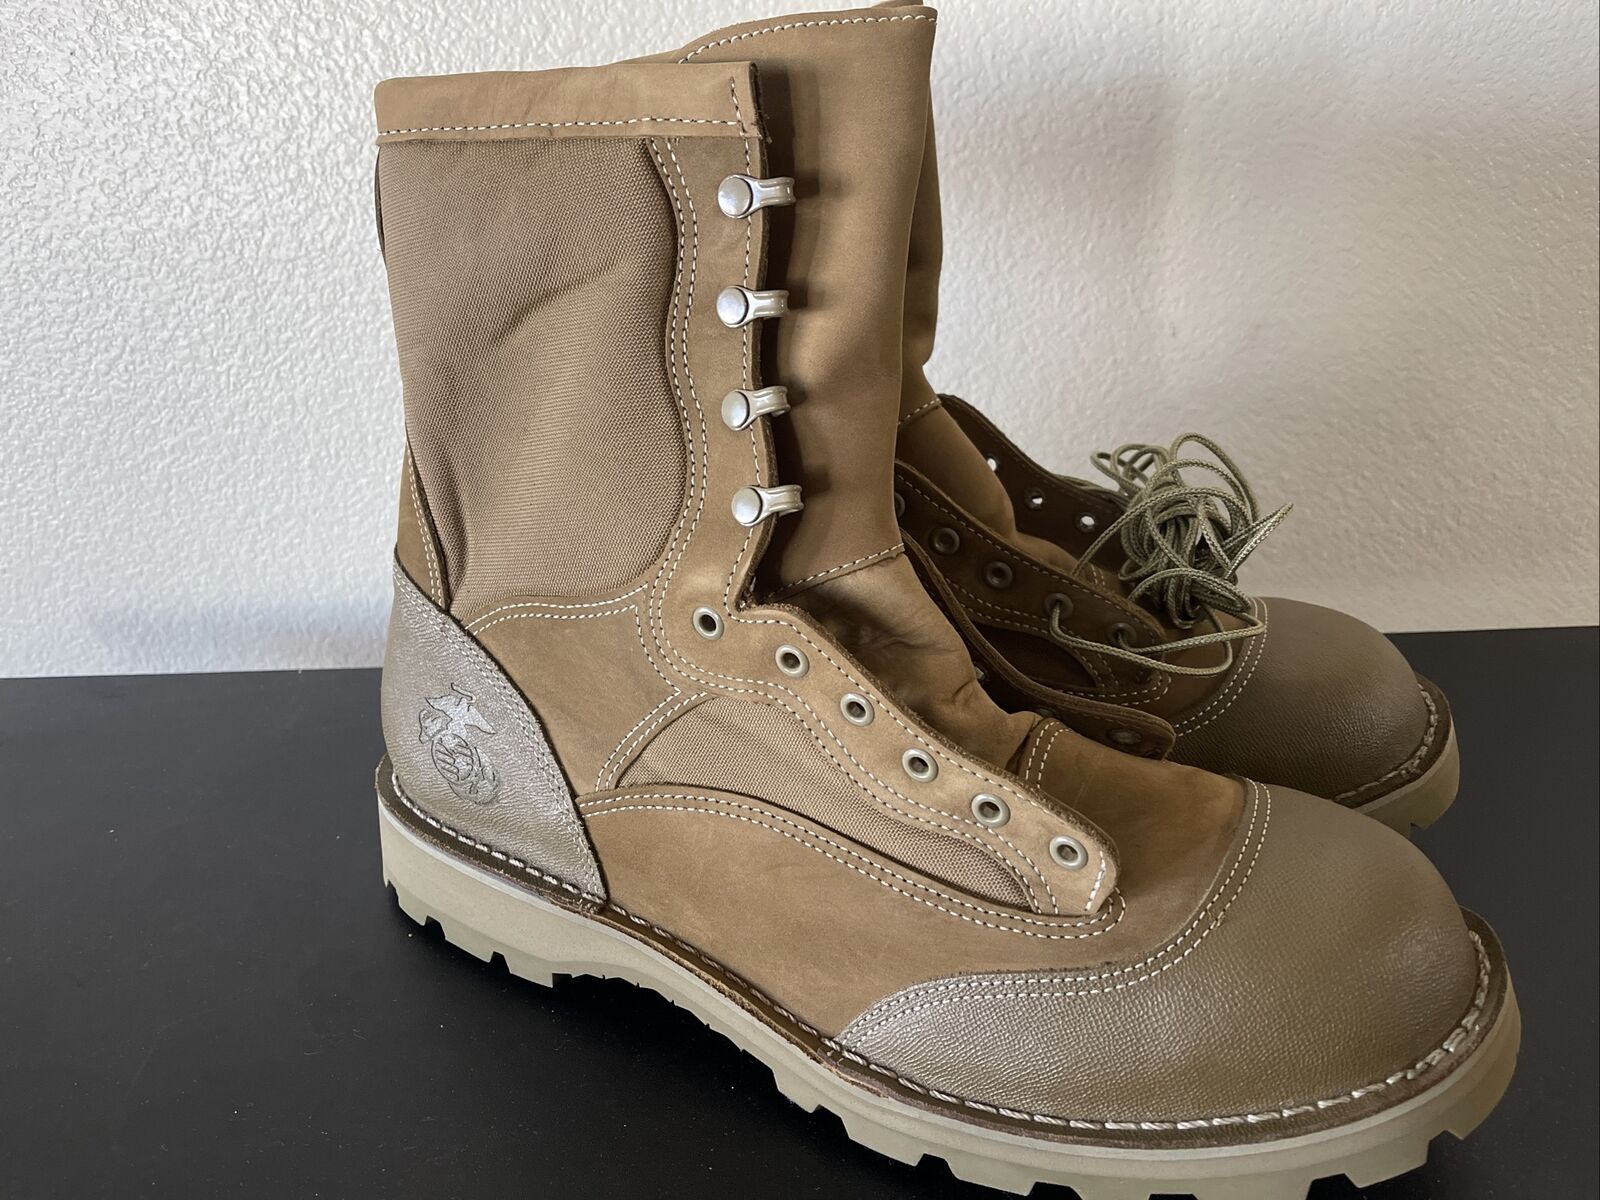 Danner USMC Military Boots Size: 15 Regular NSN: 8430-01-591-3012 Hot Weather